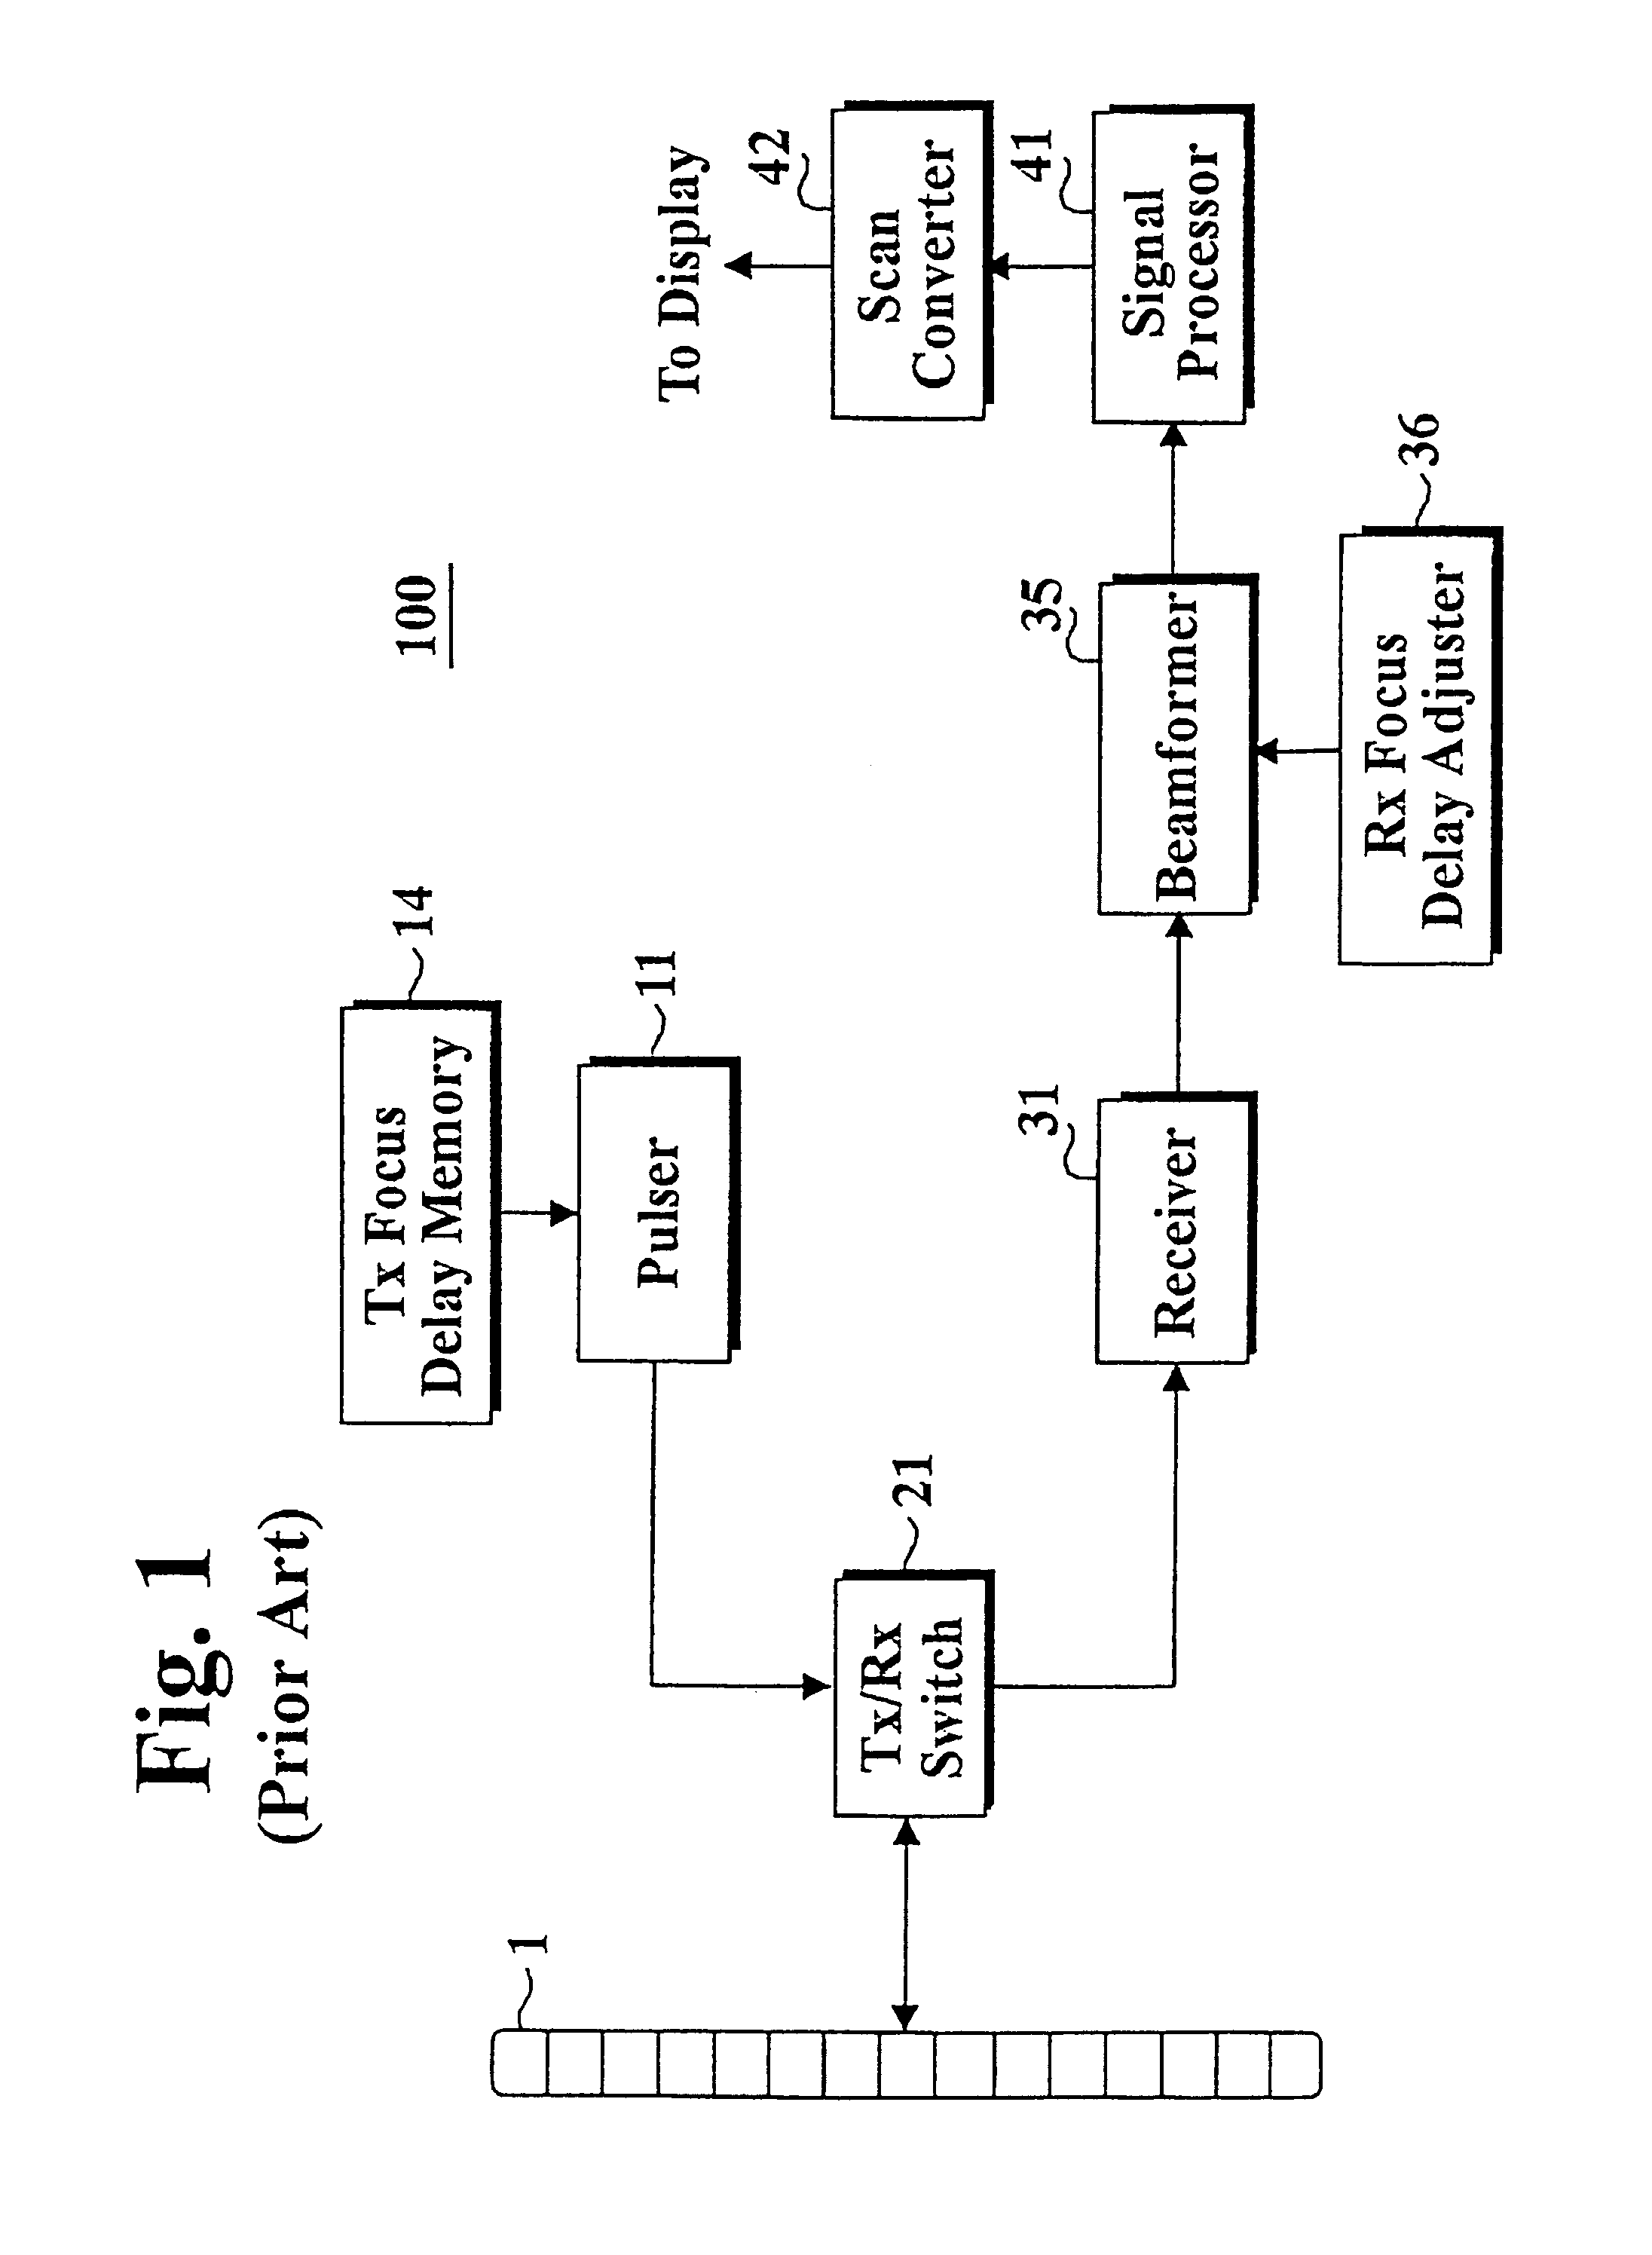 Ultrasound imaging method and apparatus based on pulse compression technique using modified golay codes